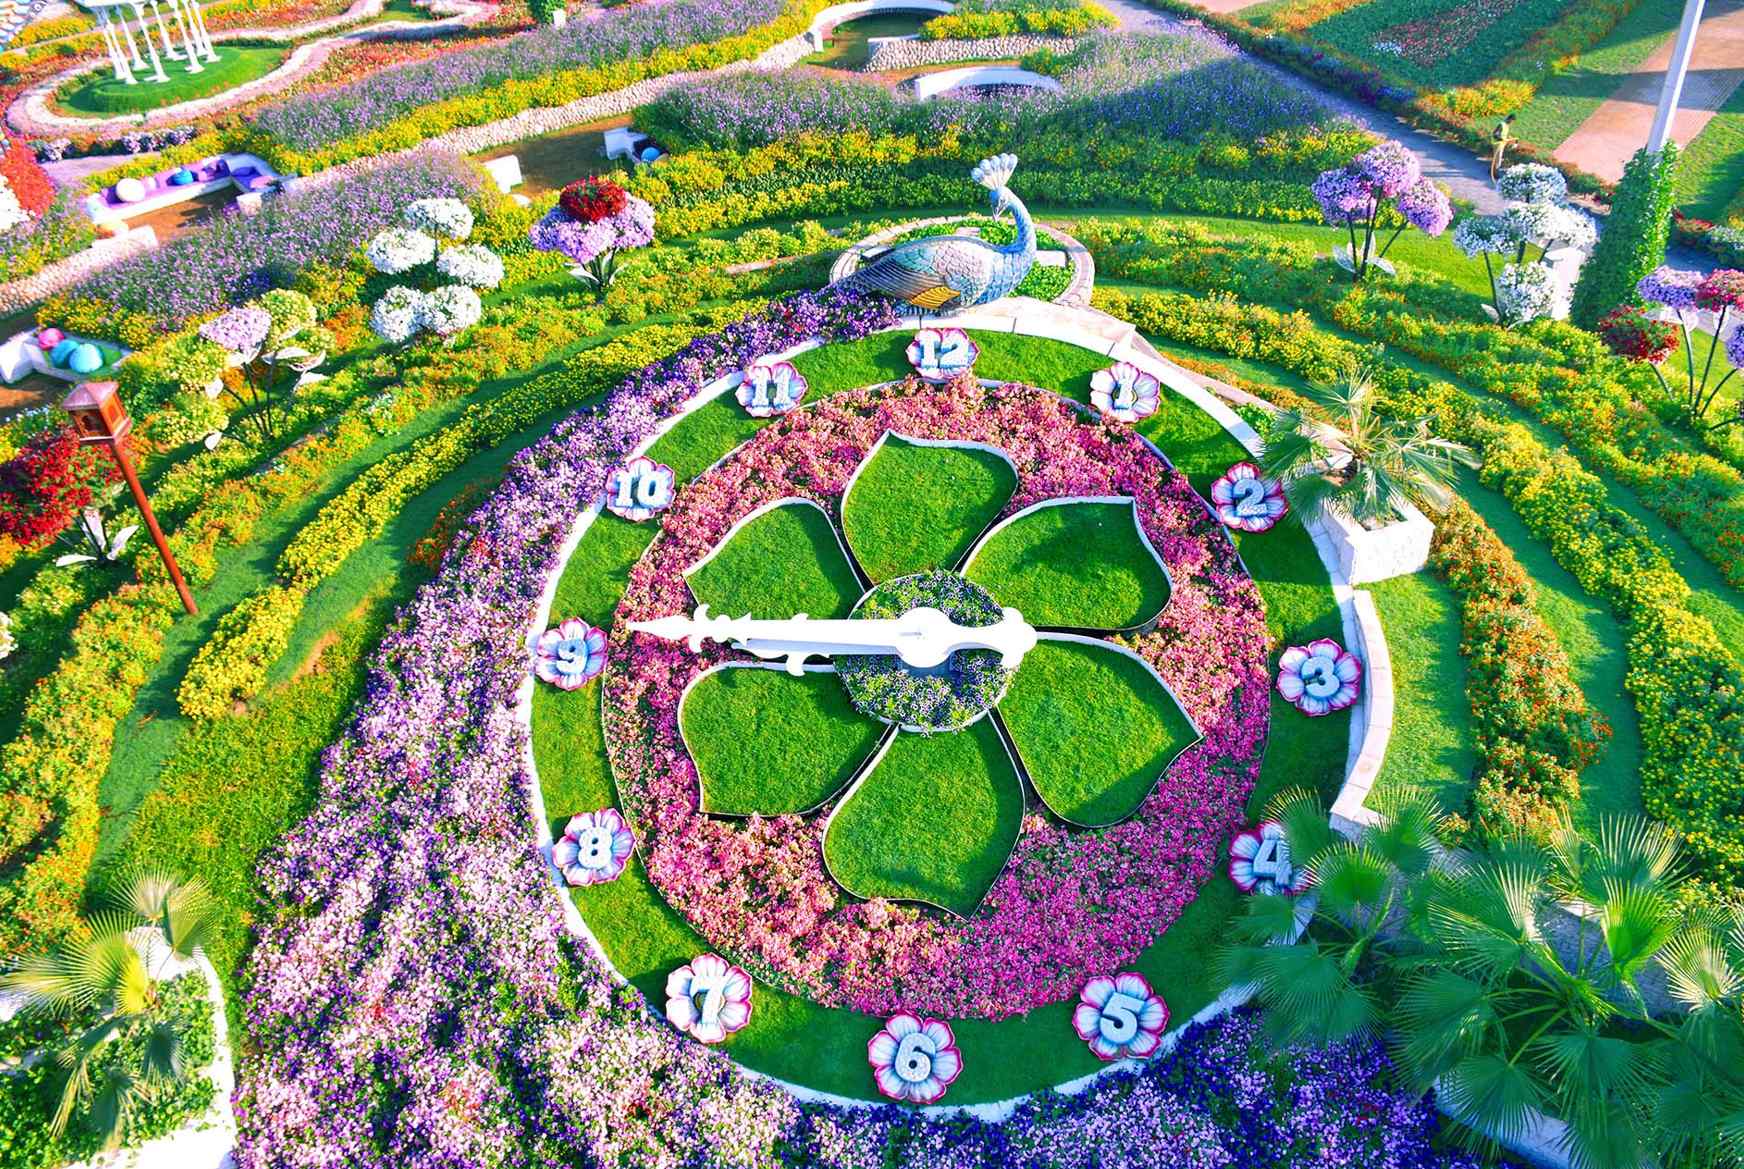 Dubai Miracle Garden features a unique 15-meter floral clock made of natural plants, symbolizing the passage of time.